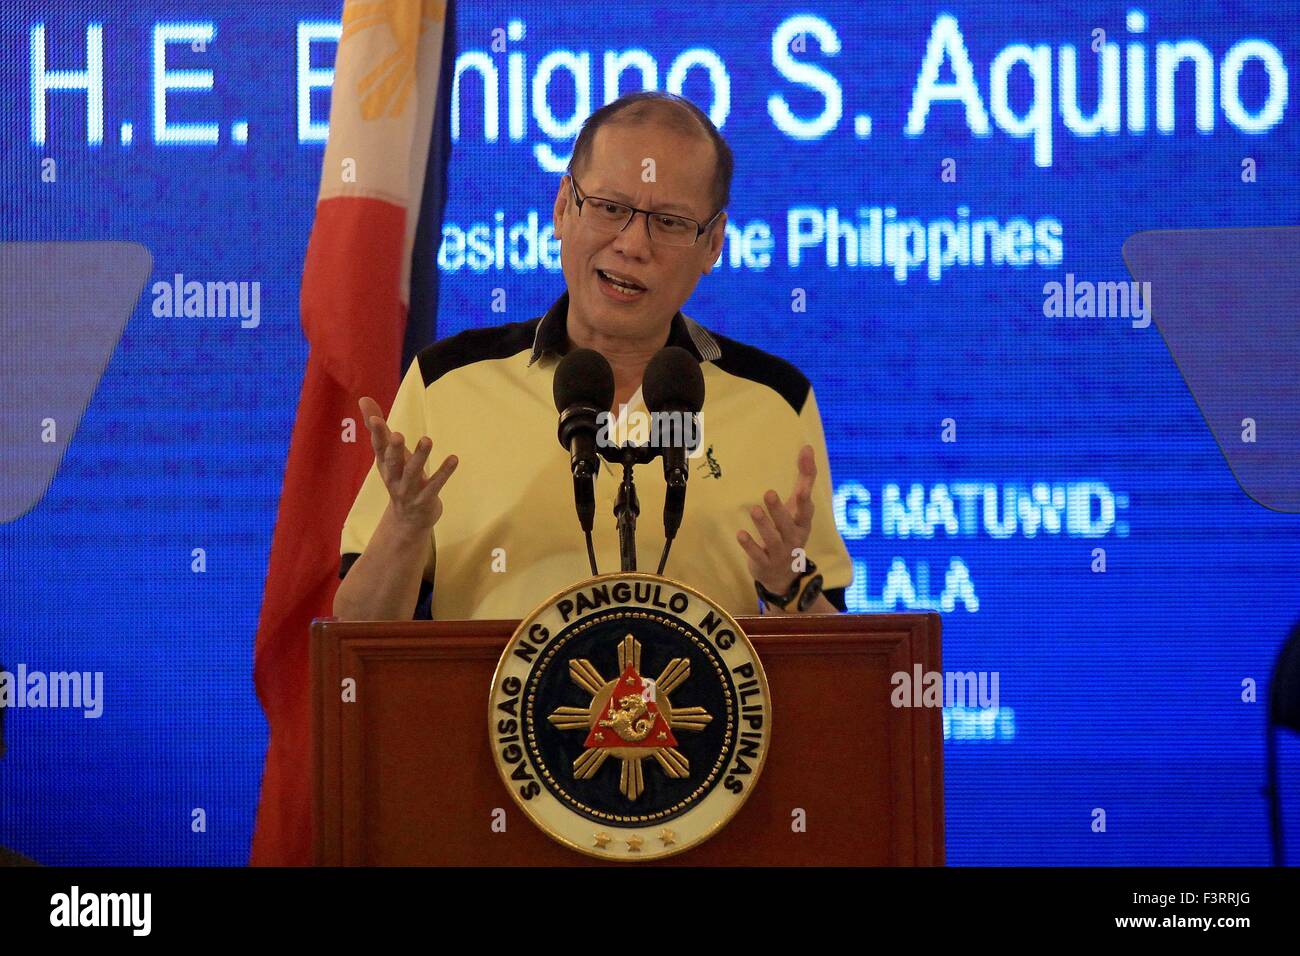 Quezon City, Philippines. 12th Oct, 2015. Philippine President Benigno Aquino III addresses the Liberal Party's announcement of their senatorial candidates for the 2016 national elections in Quezon City, the Philippines, Oct. 12, 2015. © Rouelle Umali/Xinhua/Alamy Live News Stock Photo